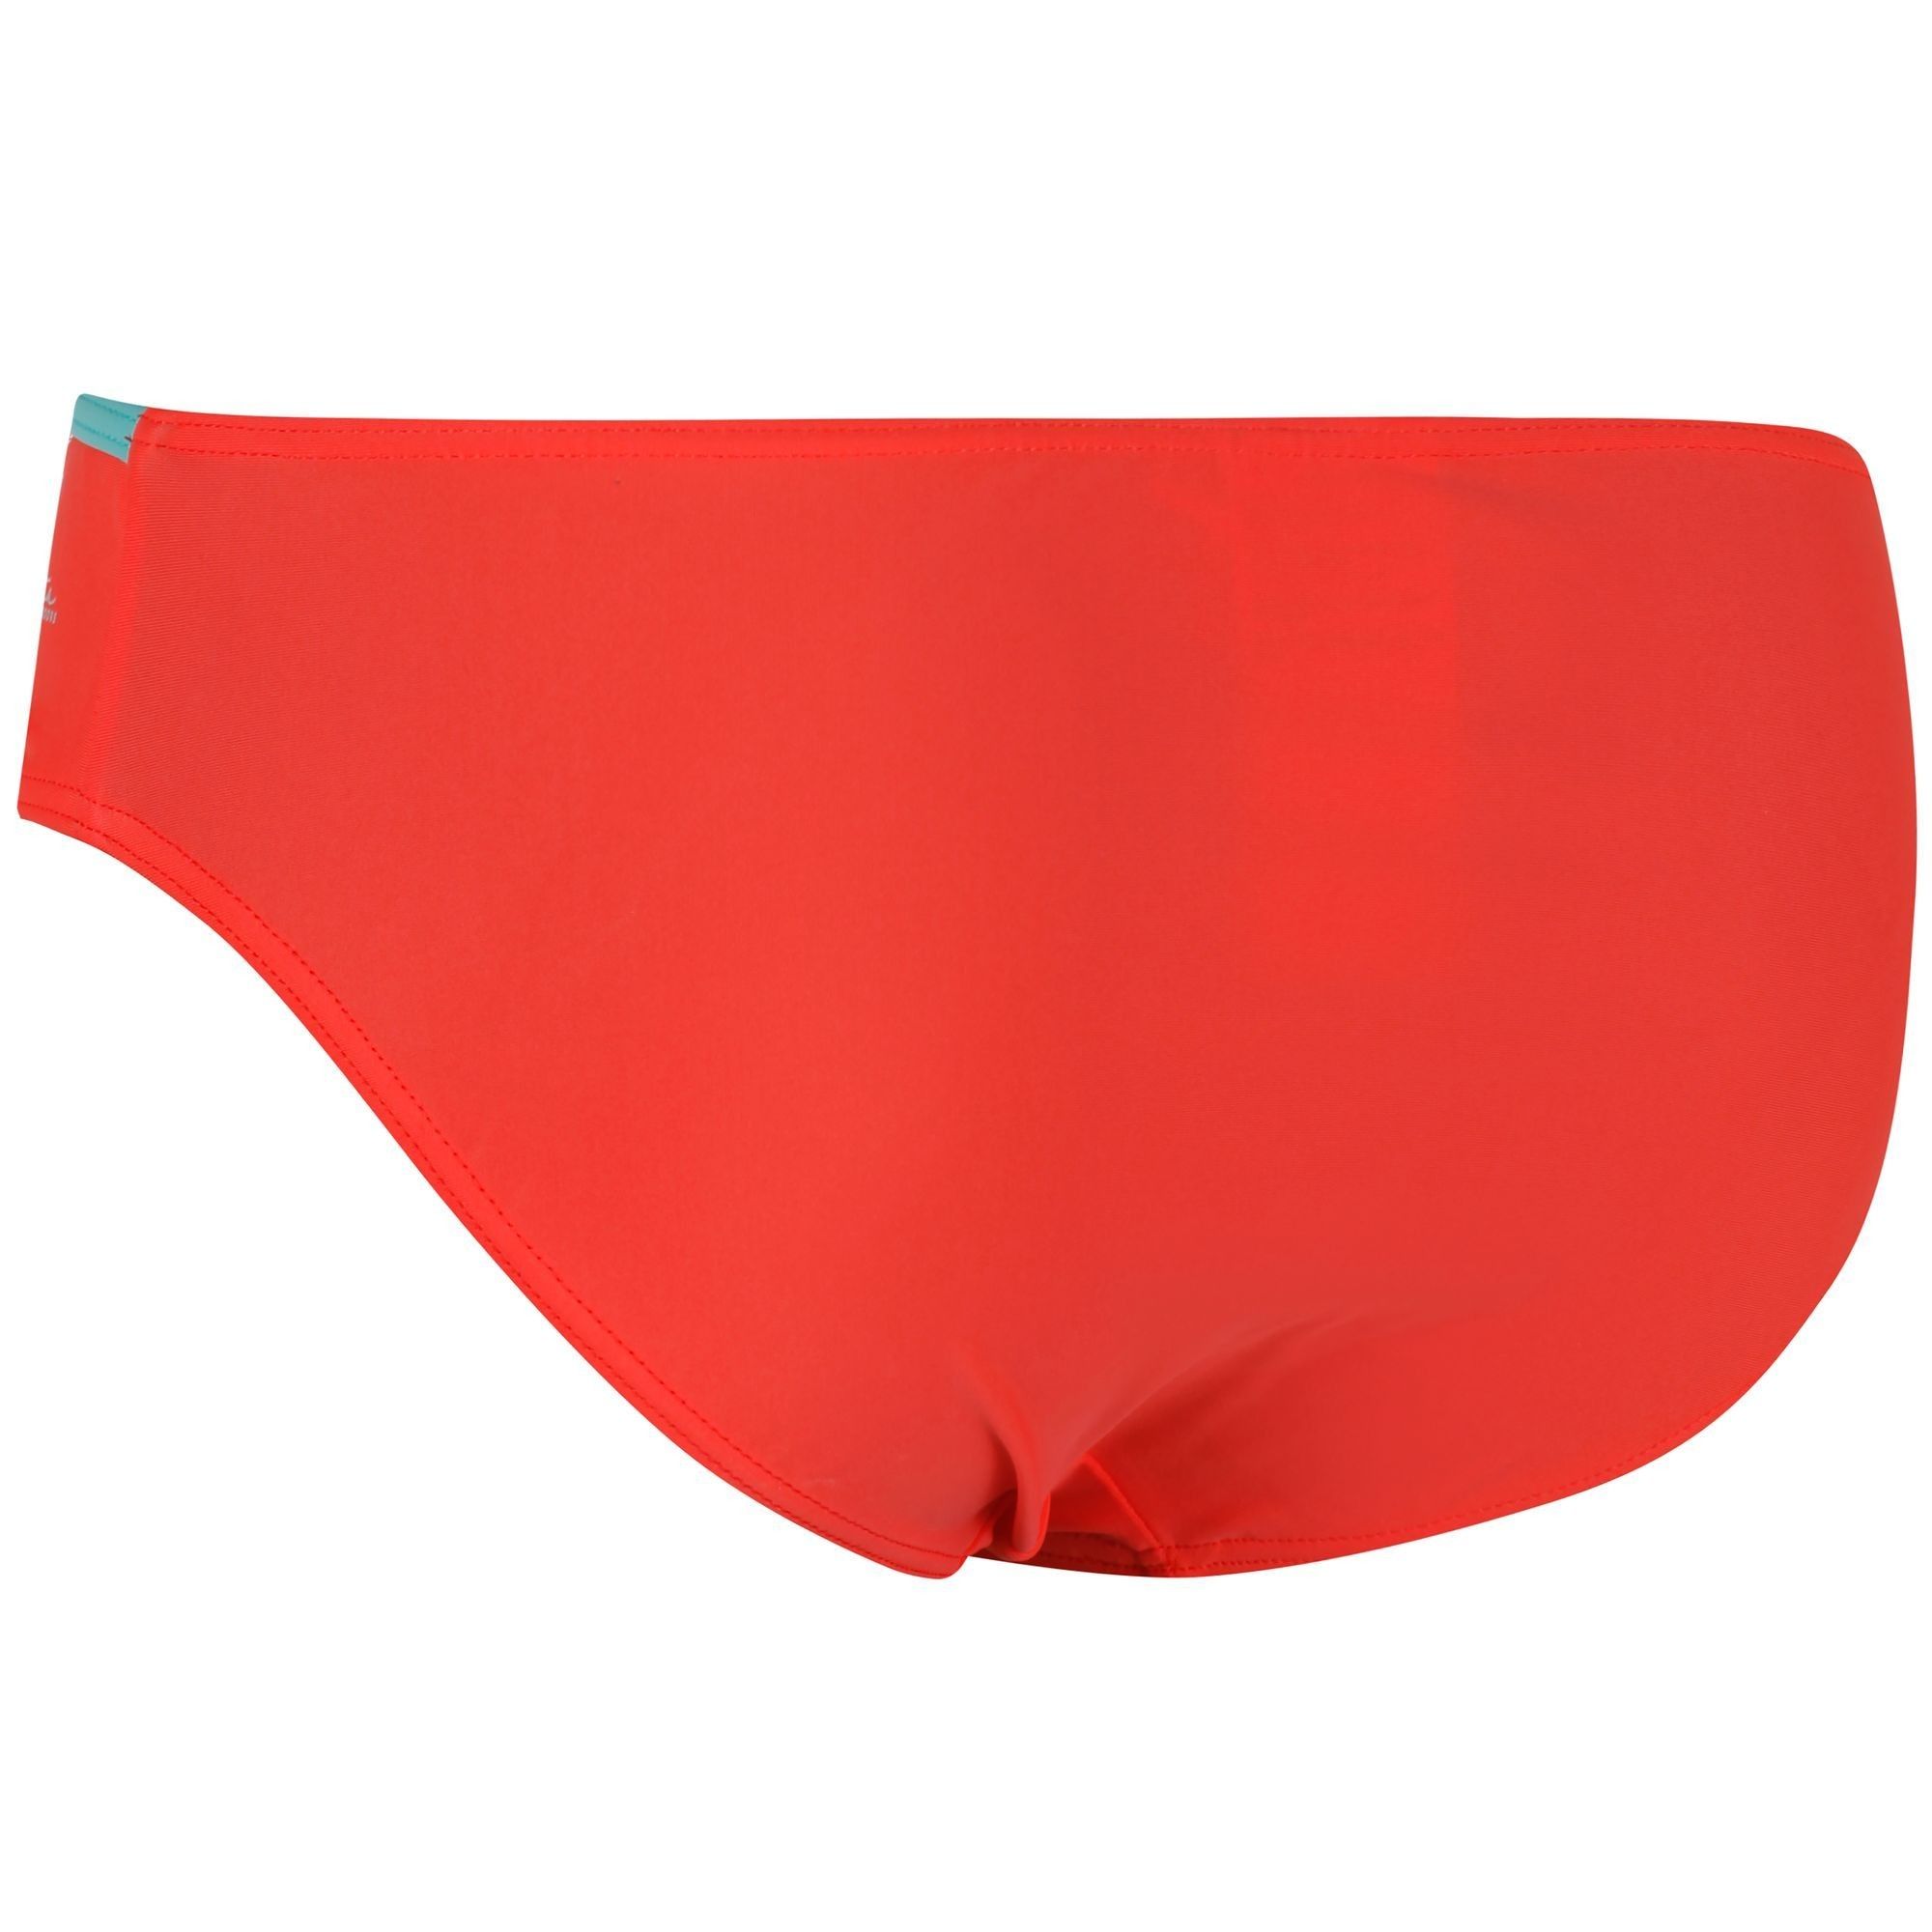 82% polyamide, 18% elastane. Mix and match your favourite styles from the Regatta Aceana Collection to create your perfect two-piece swimsuit. The Aceana Bikini Brief is made of soft-touch stretch fabric cut with a flattering high leg and ruching details around the side. With a small Regatta tab on the left hip. Regatta Womens sizing (waist approx): 6 (23in/58cm), 8 (25in/63cm), 10 (27in/68cm), 12 (29in/74cm), 14 (31in/79cm), 16 (33in/84cm), 18 (36in/91cm), 20 (38in/96cm), 22 (41in/104cm), 24 (43in/109cm), 26 (45in/114cm), 28 (47in/119cm), 30 (49in/124cm), 32 (51in/129cm), 34 (53in/135cm), 36 (55in/140cm).